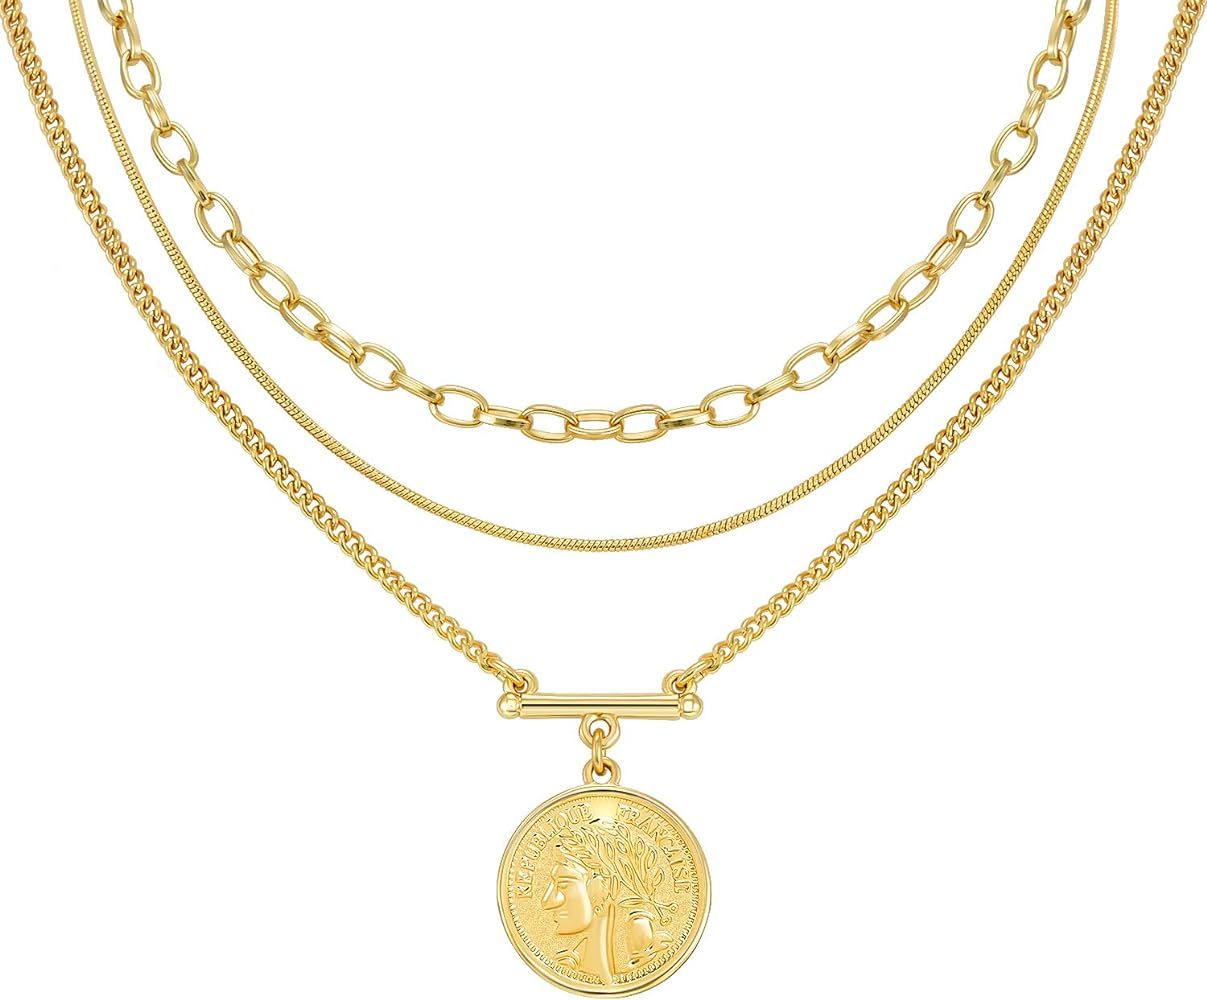 Layered 18k Gold Plated Necklaces for Women - Multilayer Coin Medallion Pendant Necklace Adjustable  | Amazon (US)